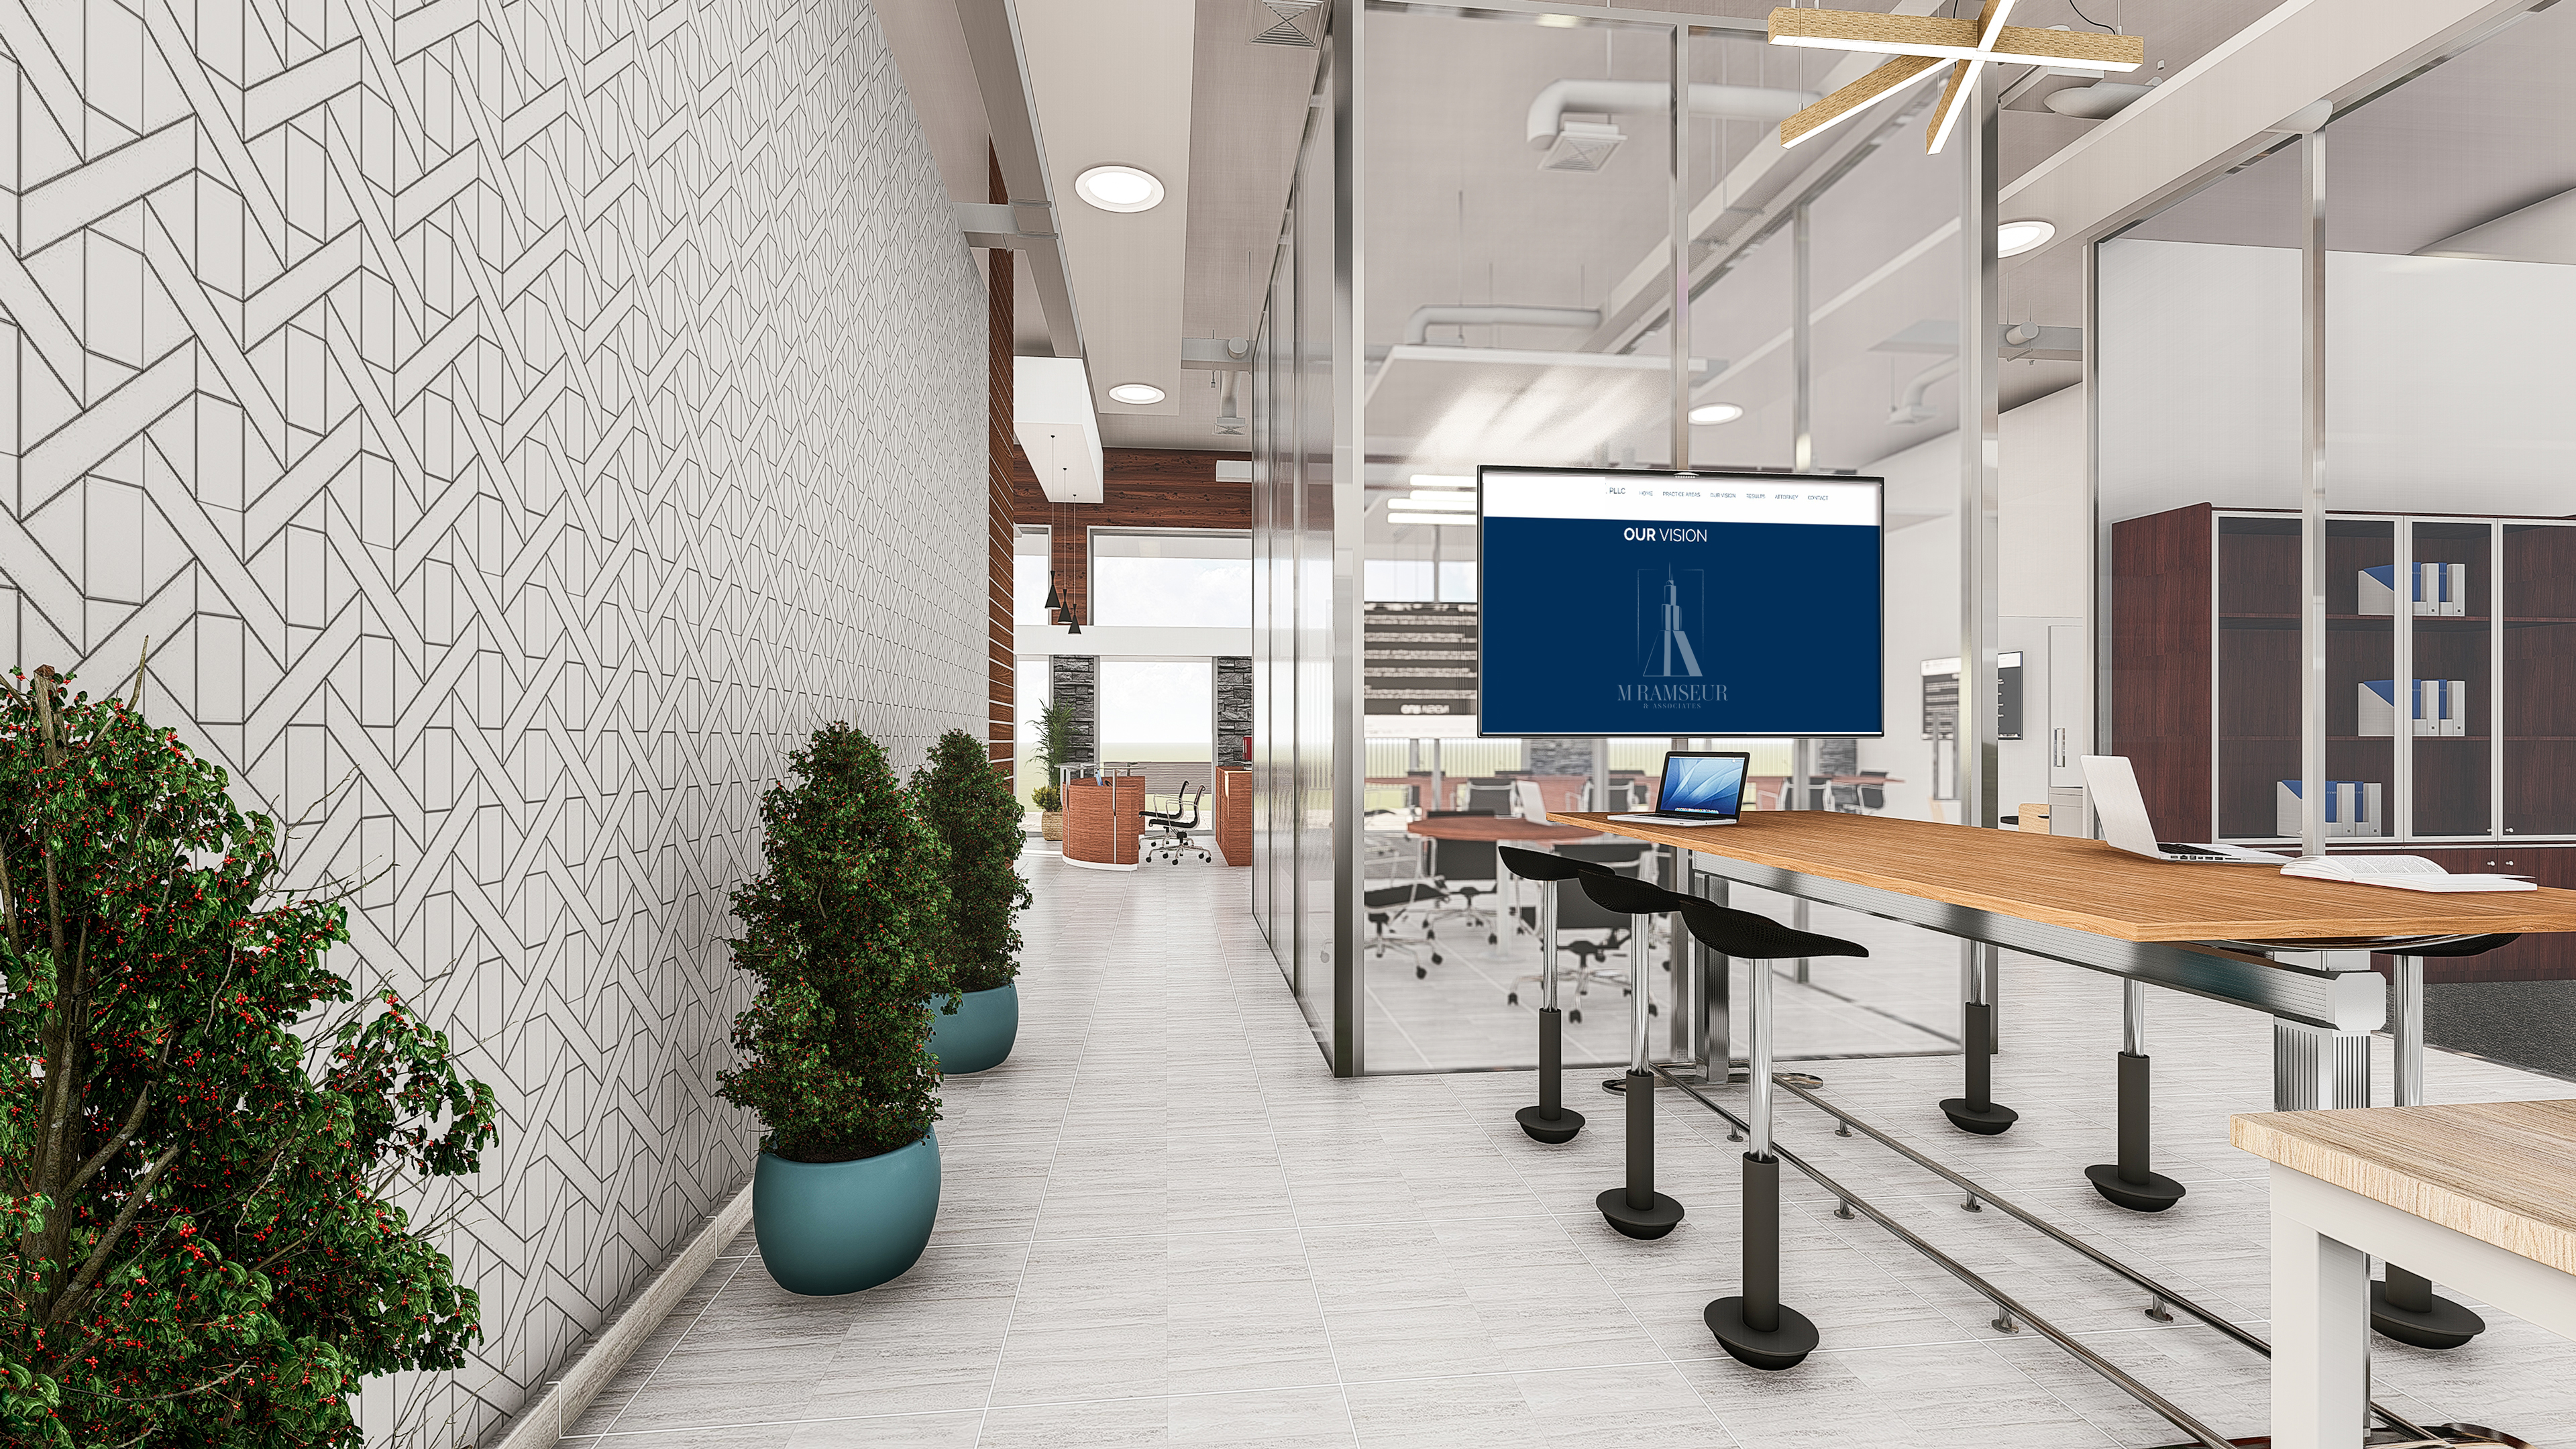 SCHEMATIC DESIGN BUSINESS OFFICE CONCEPT COLLABORATION SPACE 3D RENDERING